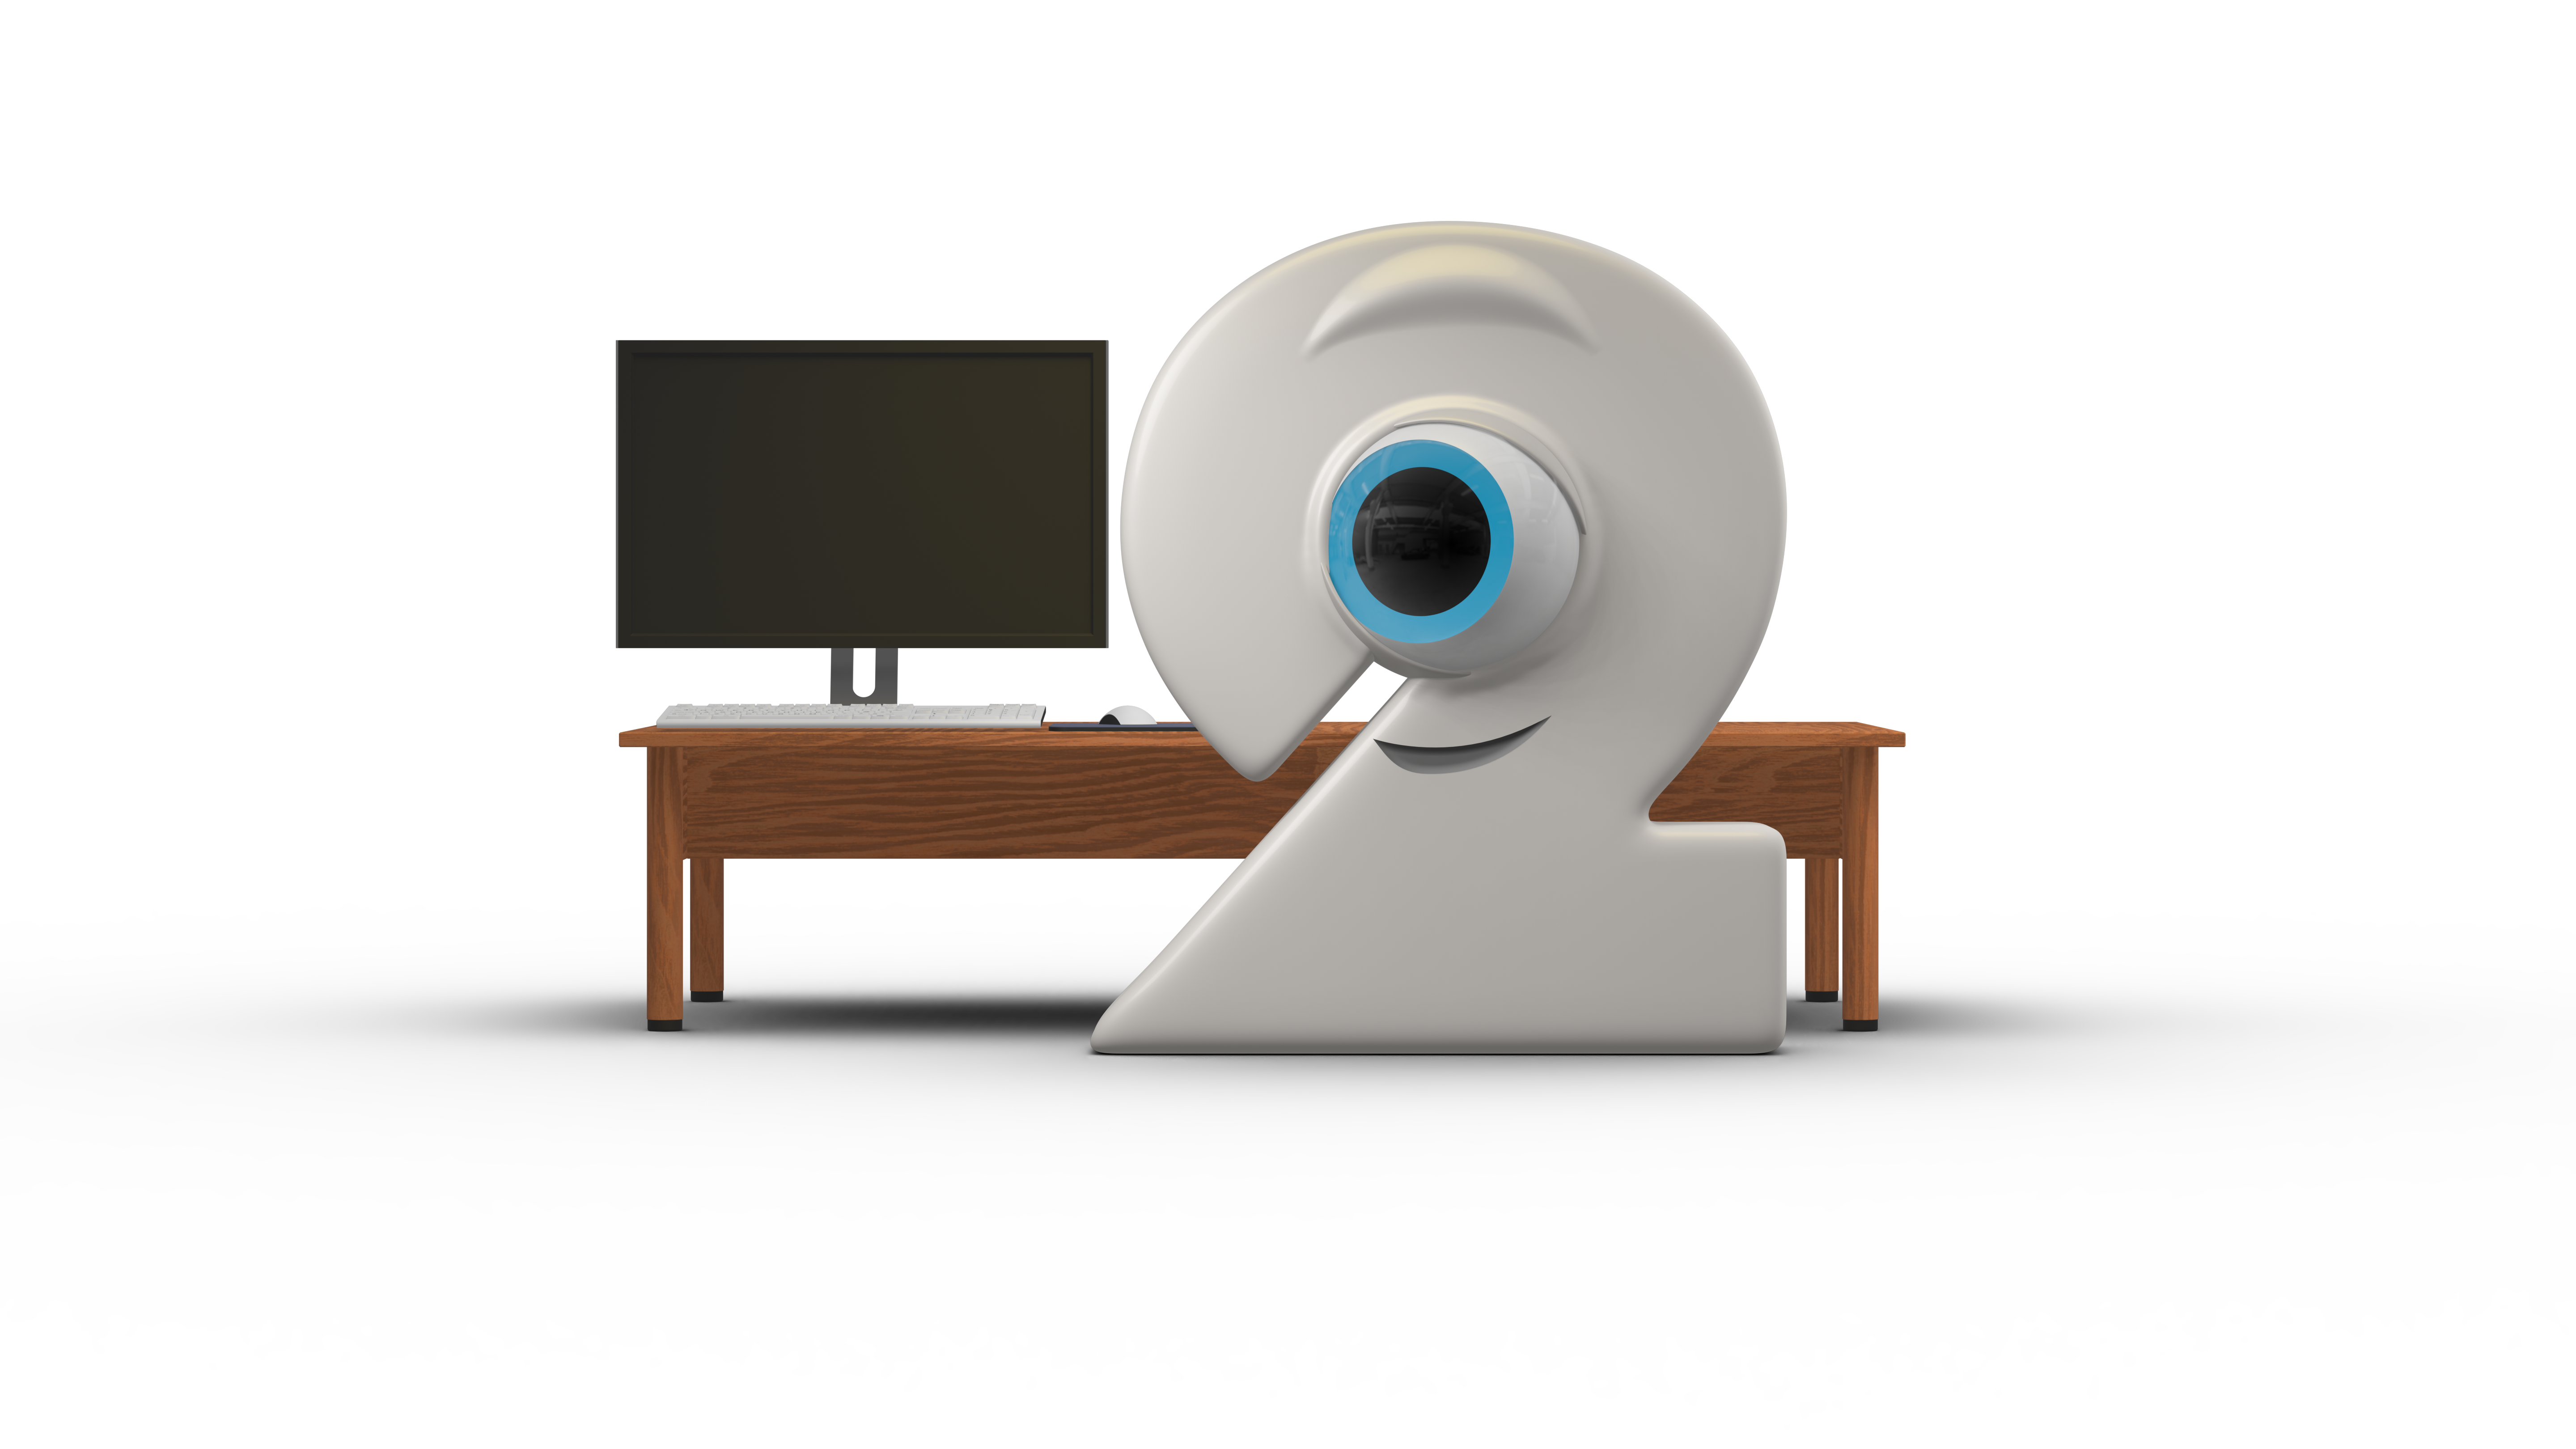 The mascot, a Two with big eyes, is standing in front of a desk with a monitor.